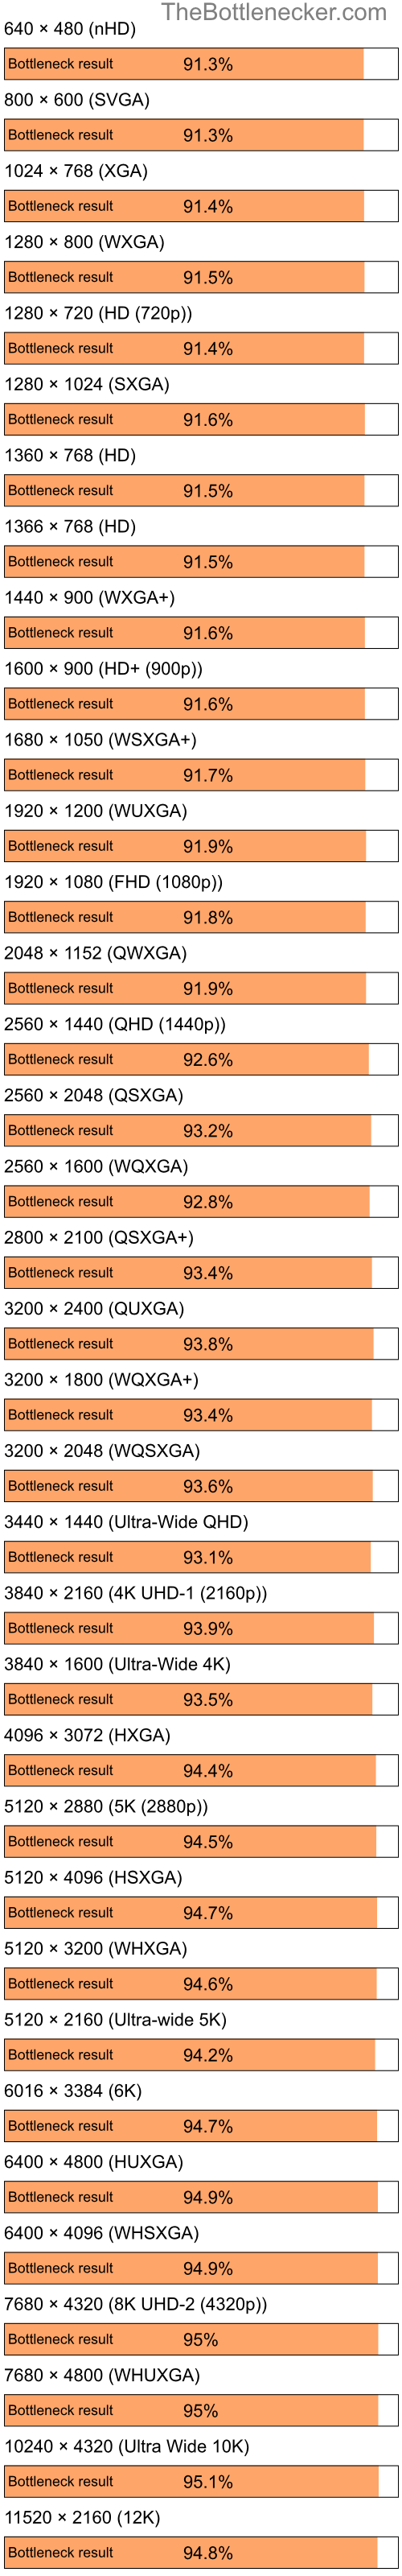 Bottleneck results by resolution for Intel Pentium 4 and AMD Radeon 9200 in Graphic Card Intense Tasks